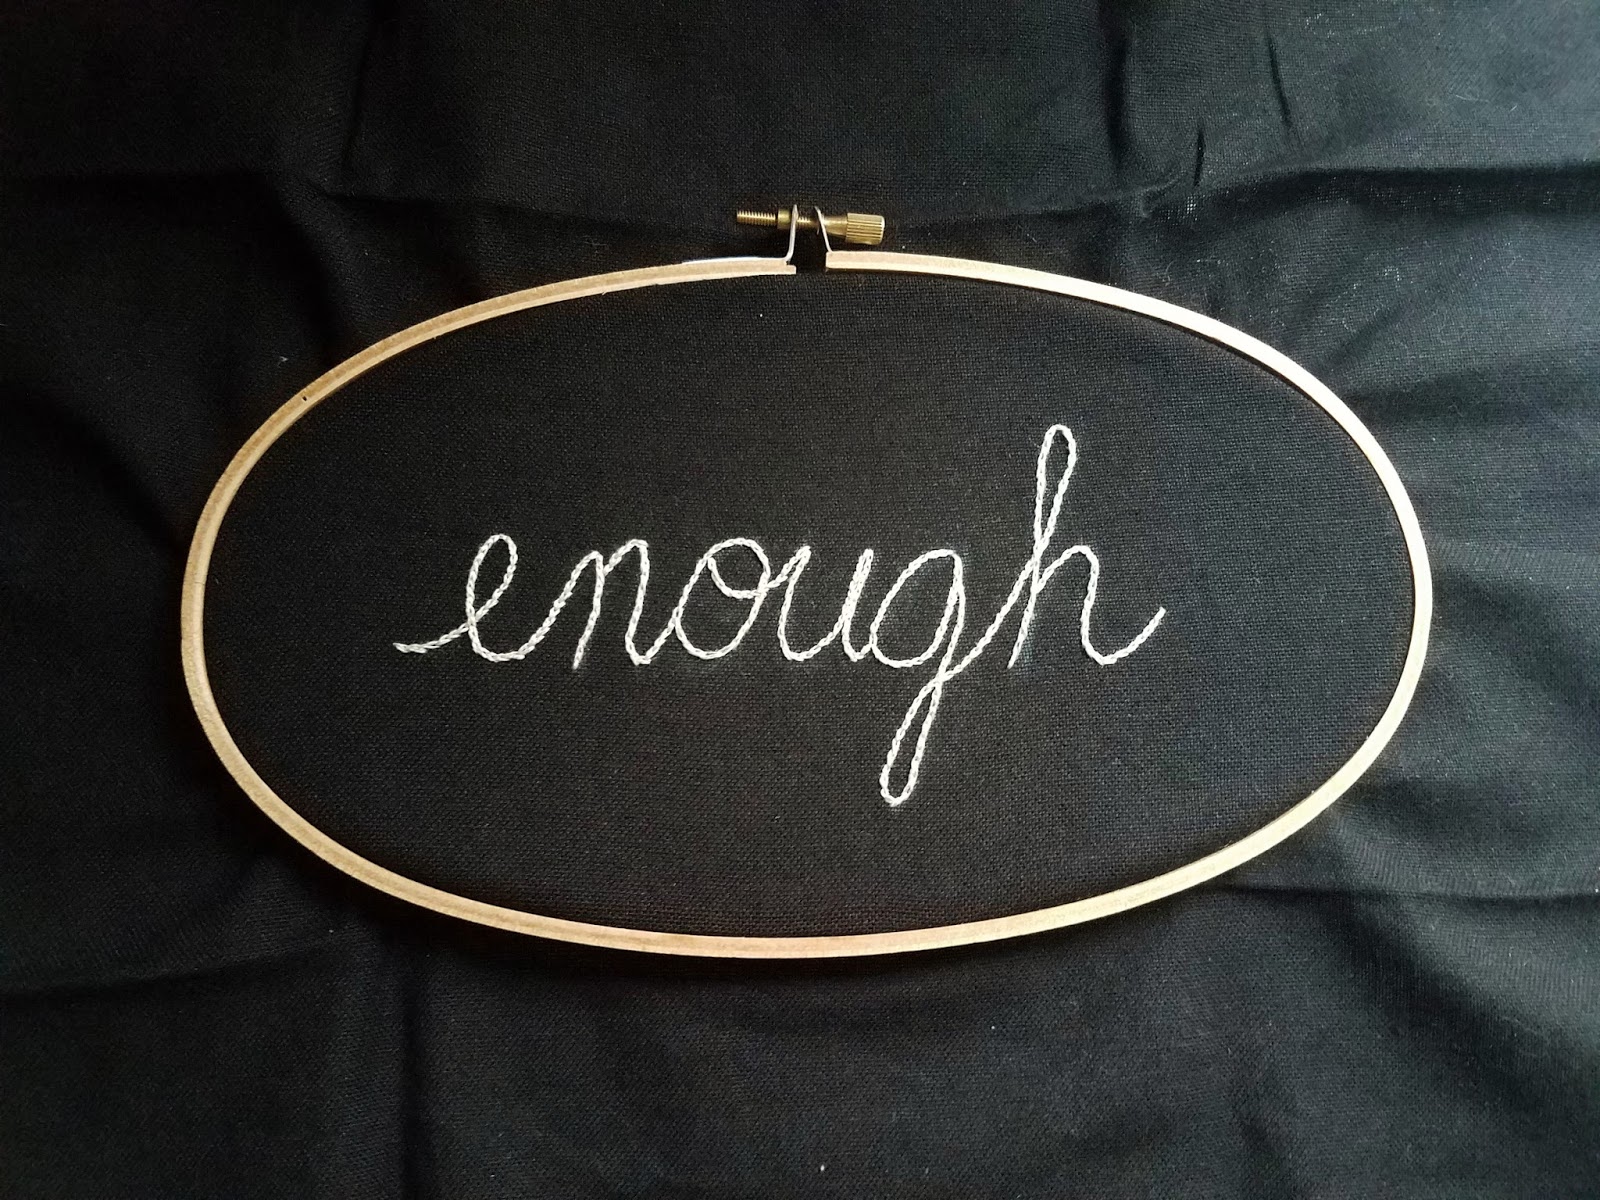 Enough embroidery by floresita on Feeling Stitchy